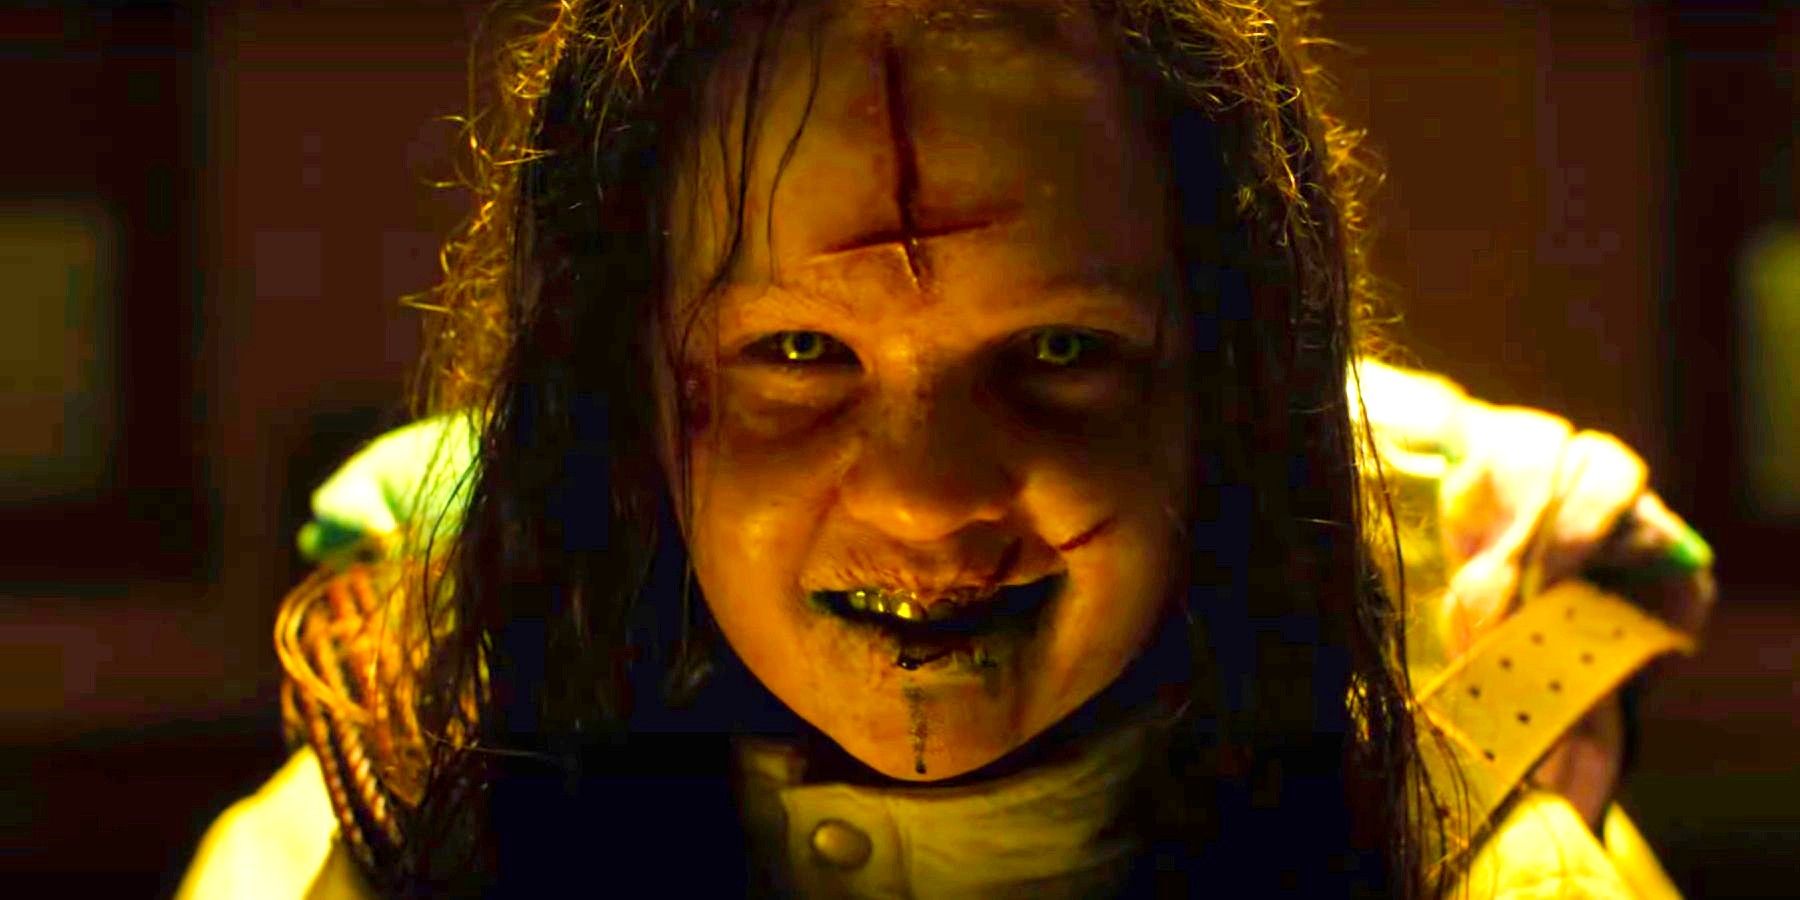 Possessed child with an inverted cross in her forehead in The Exorcist Believer trailer